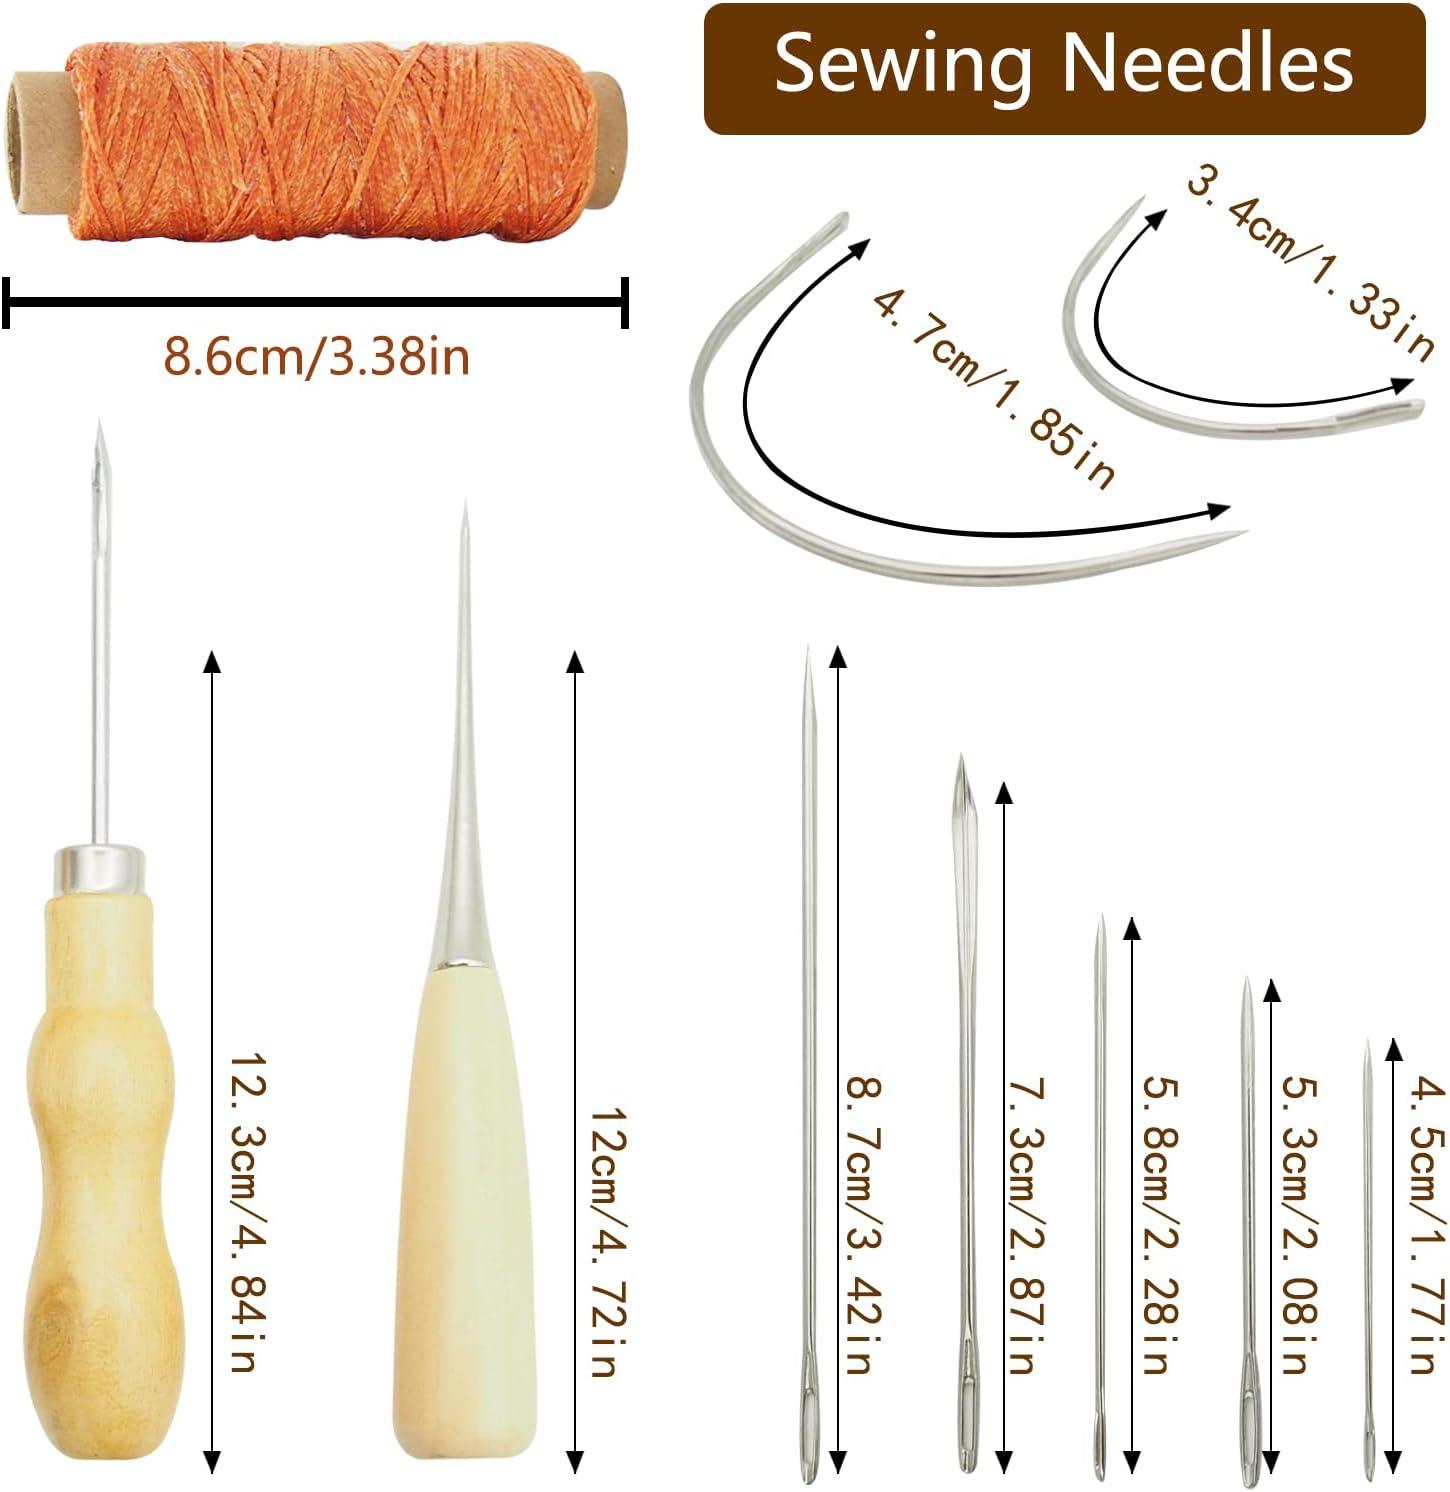 PLANTIONAL Leather Repair Sewing Kit: 31pcs Leather Working Tools with Pro  Waxed Thread, Large Eye Hand Sewing Needles, 3 Versatile Awl, Heavy Duty